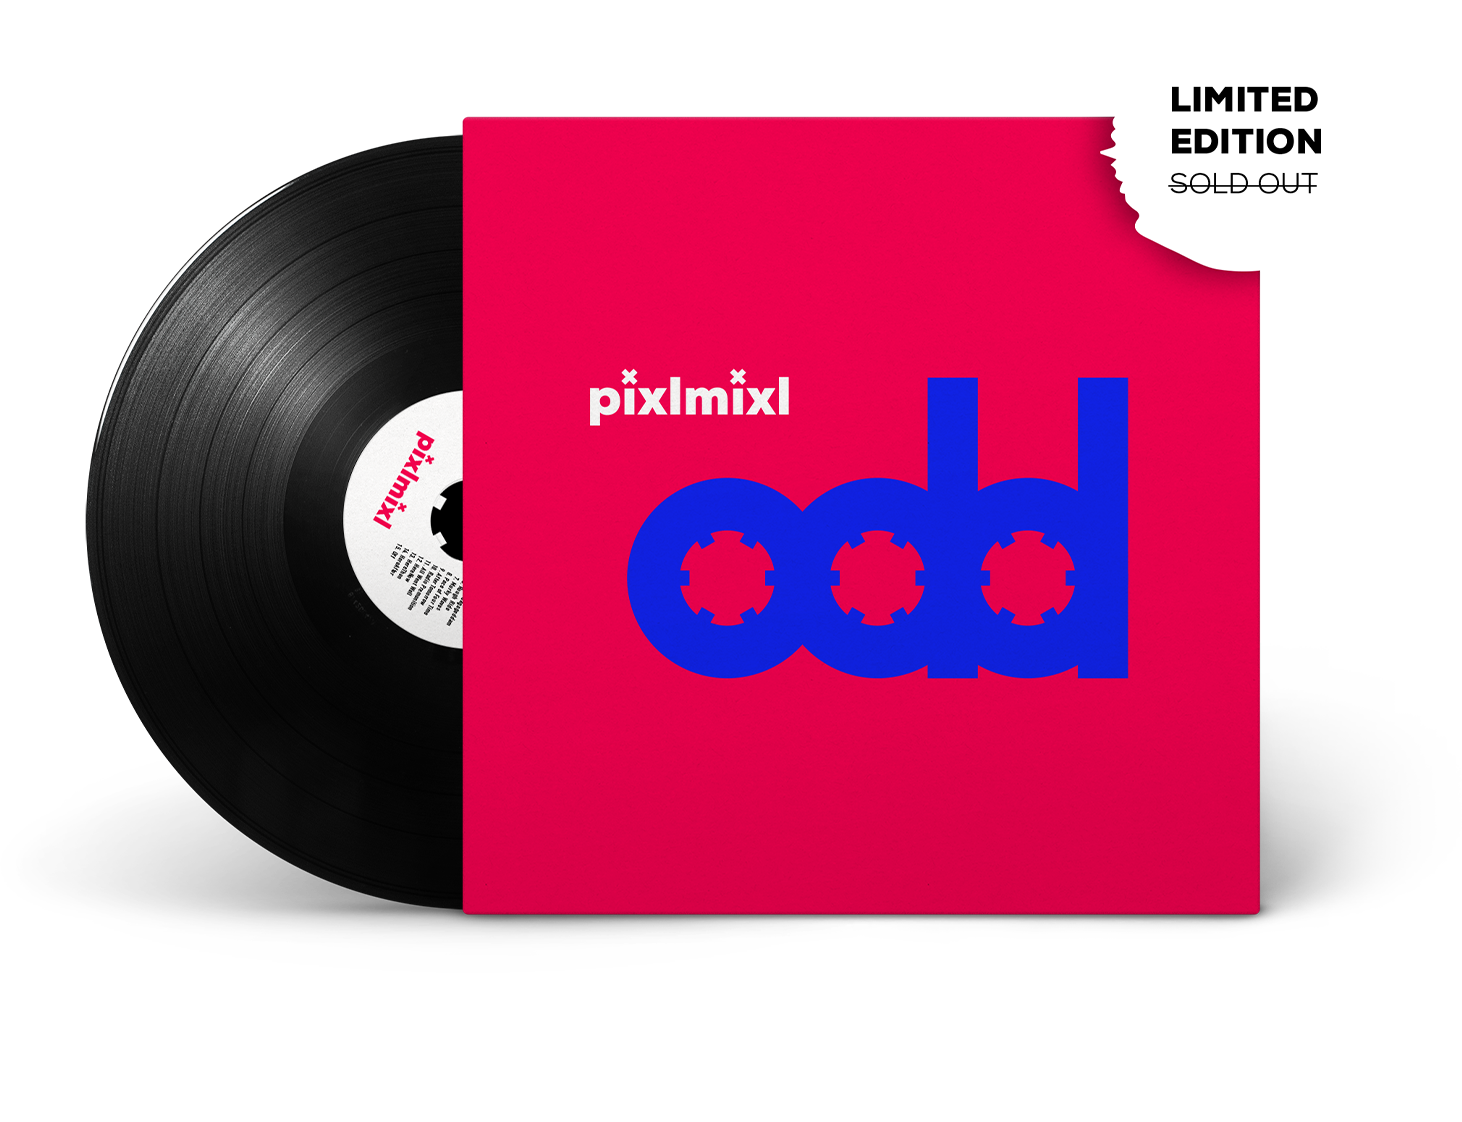 Limited Edition: Odd by Pixlmixl